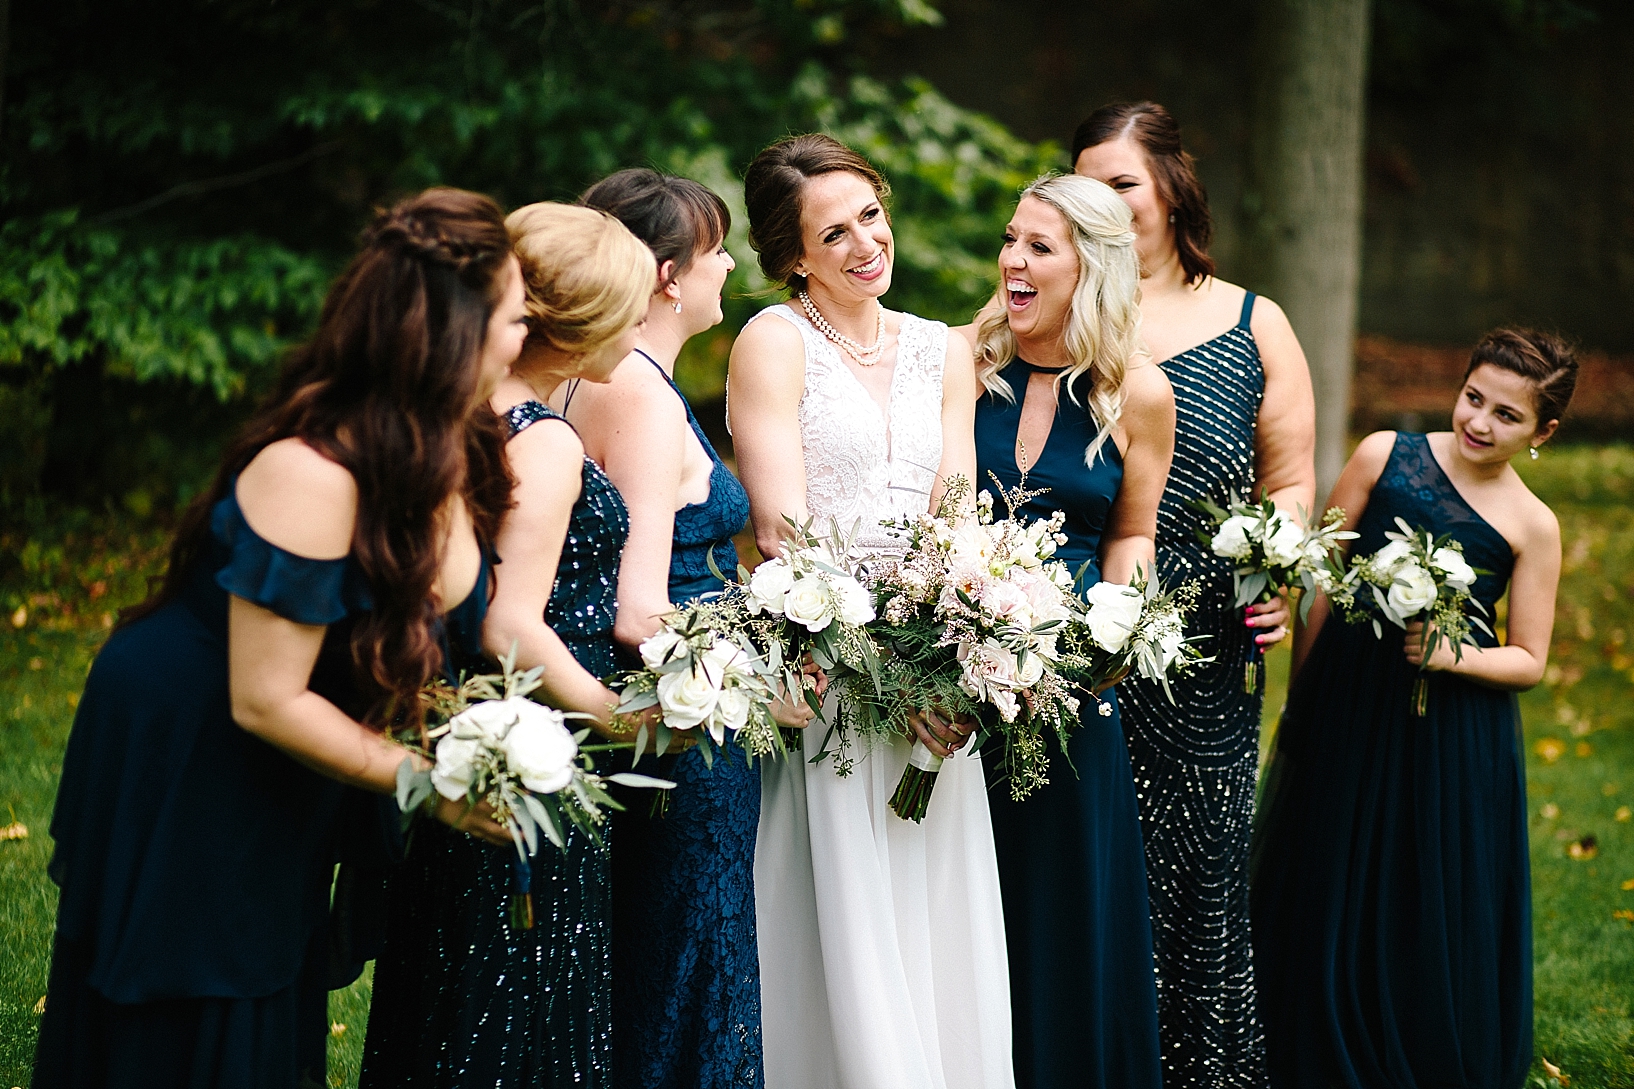 bride and her bridesmaids in navy blue dresses